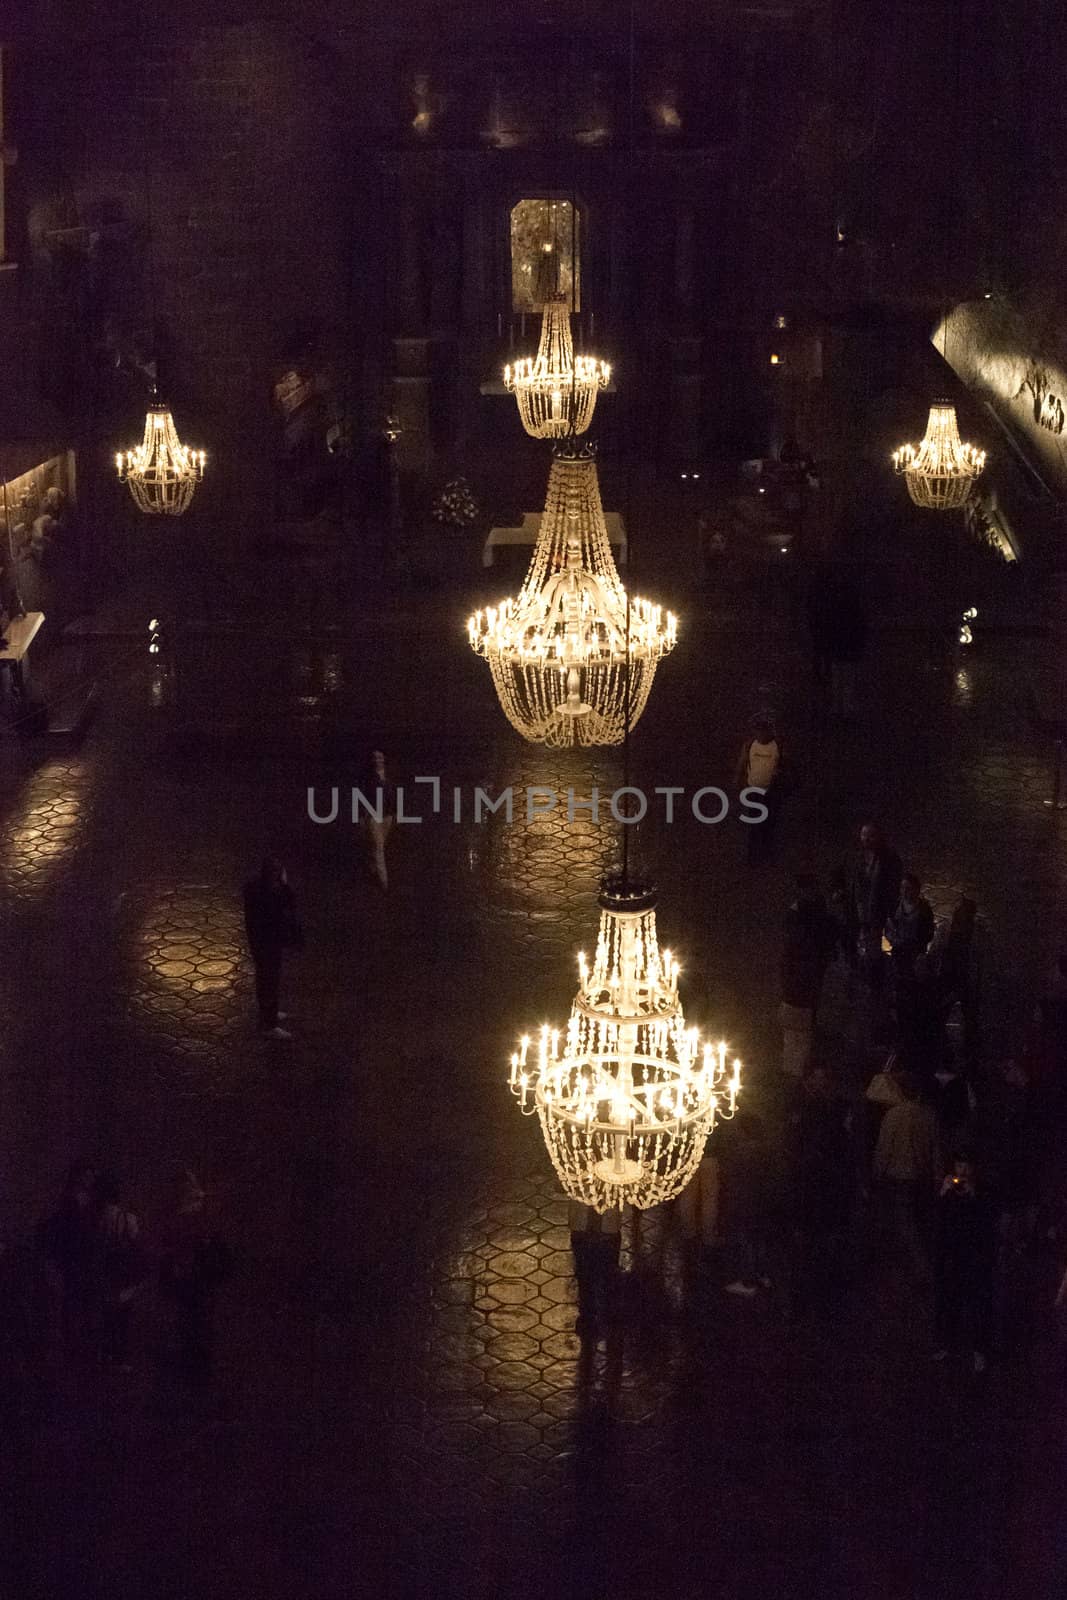 Wieliczka Salt Mine continuously produced table salt from the 13th century until 2007 as one of the world's oldest operating salt mines.